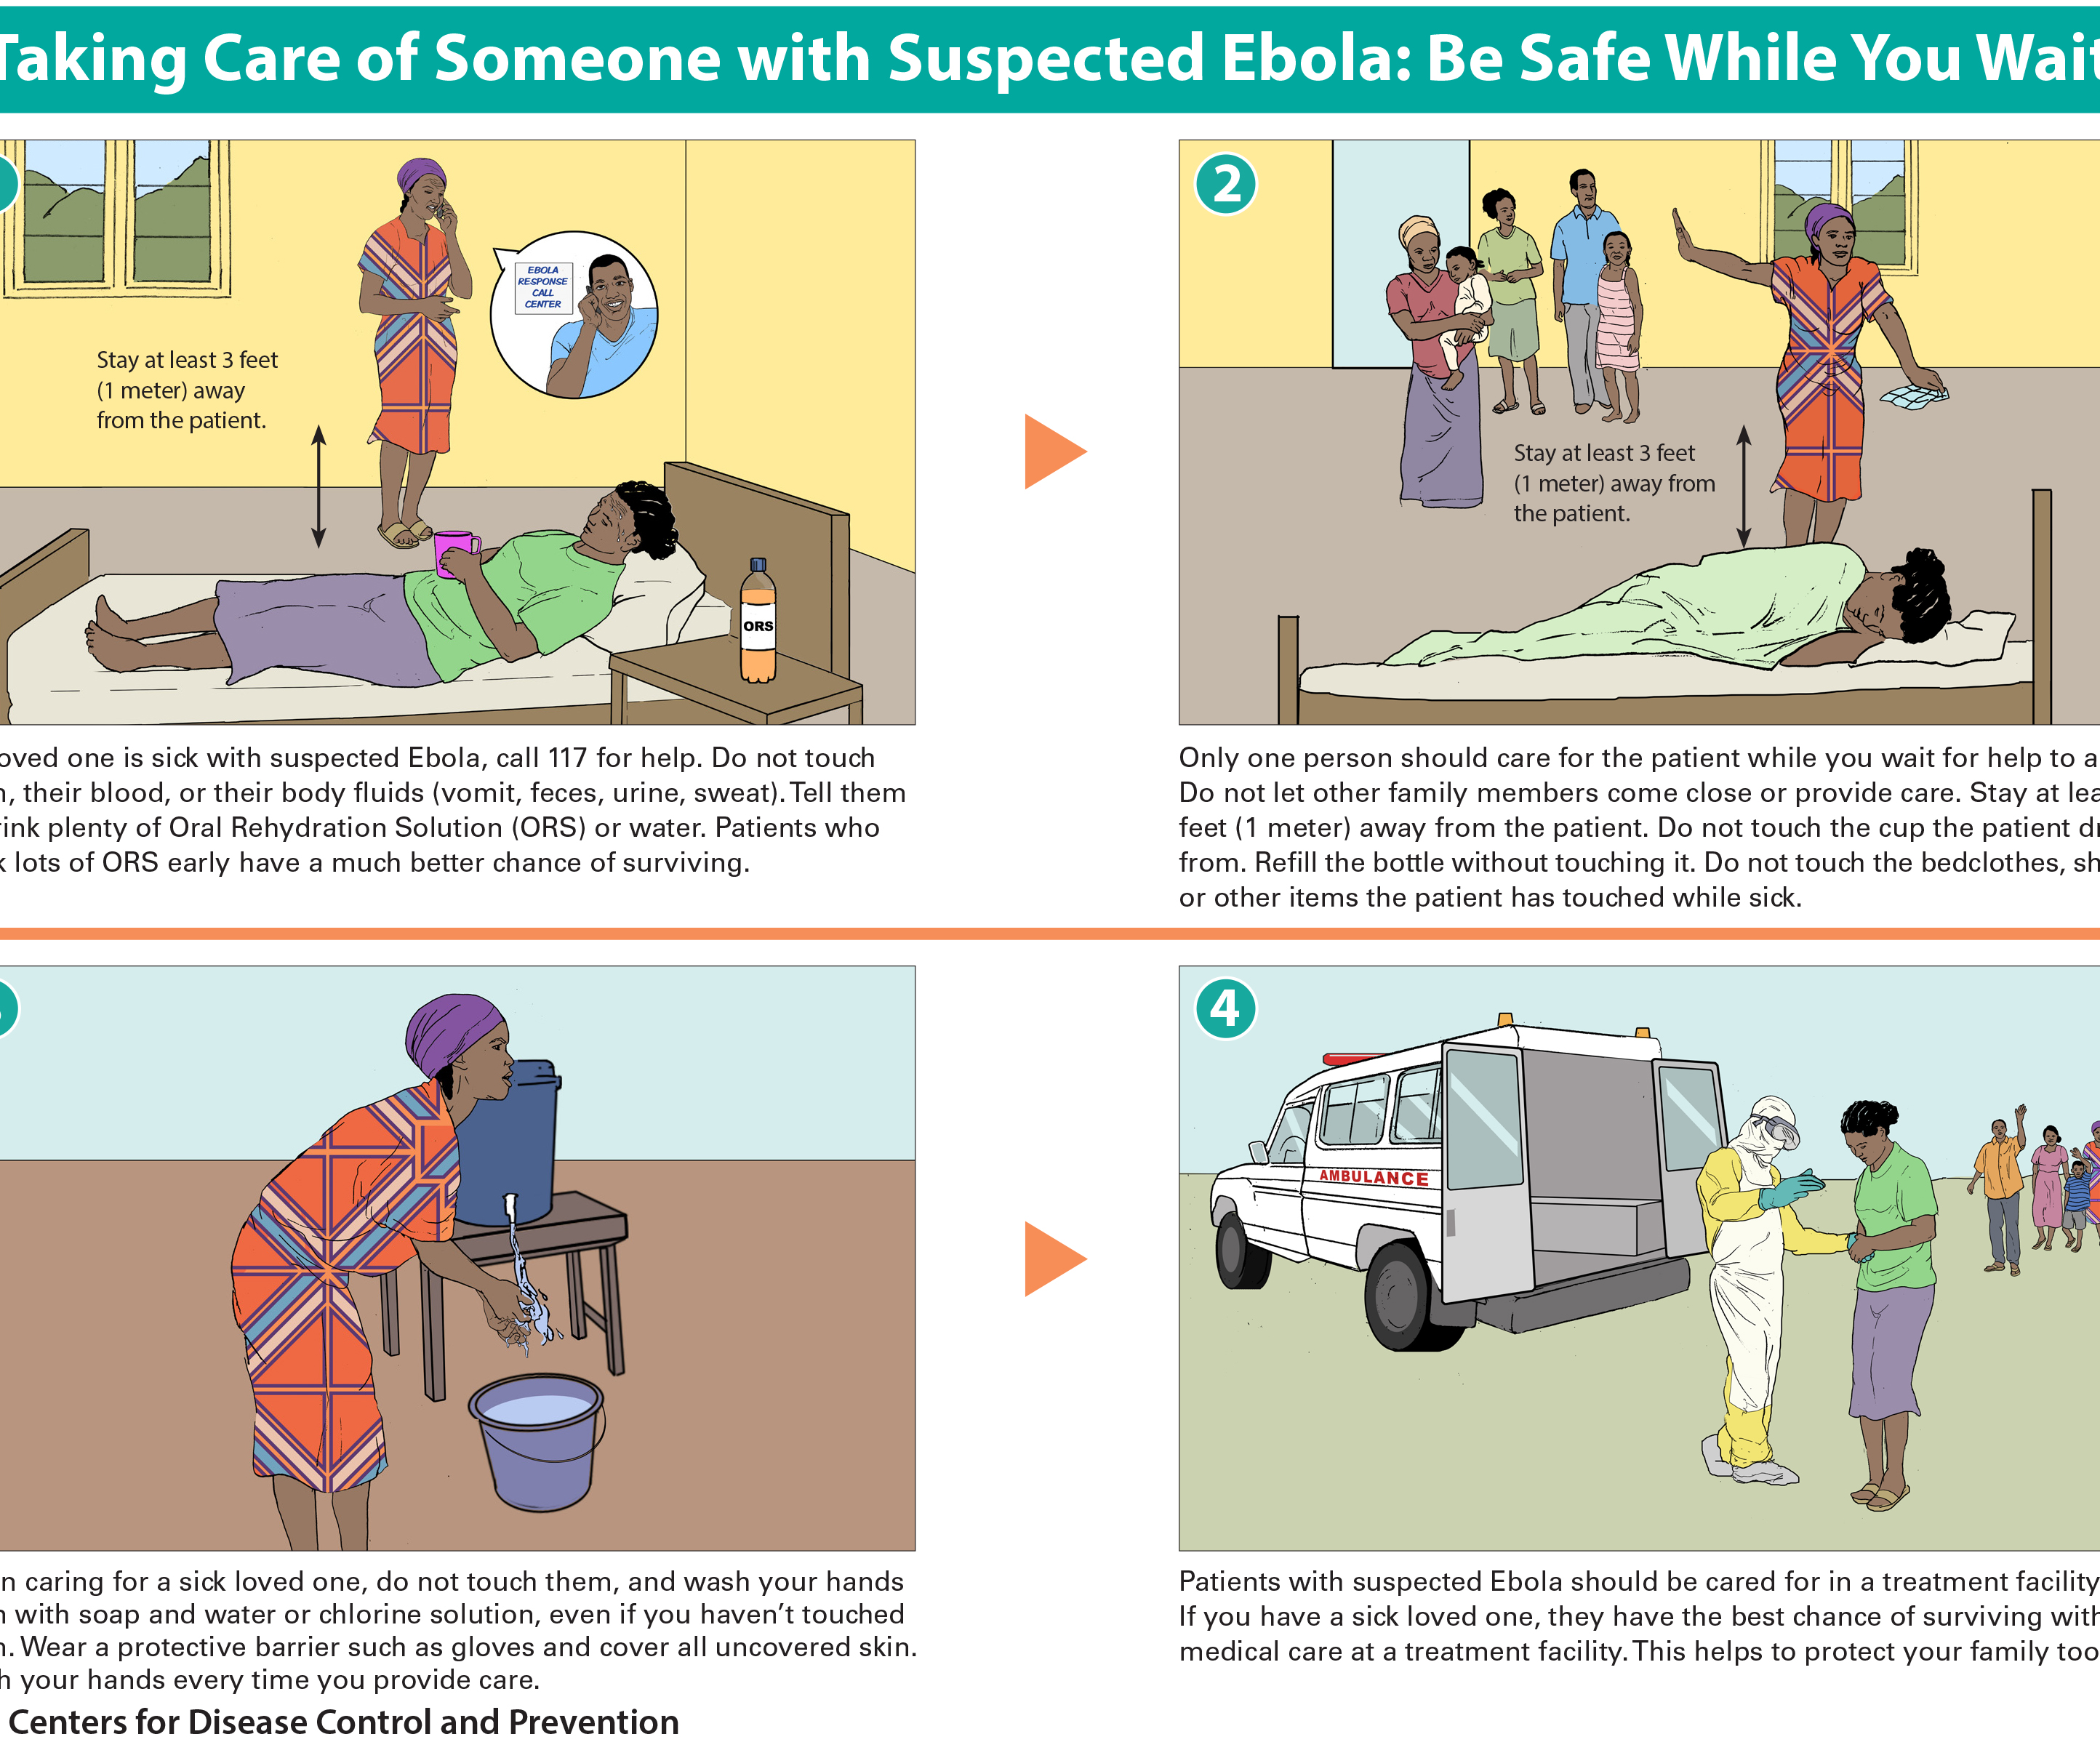 Taking Care of Someone with Suspected Ebola: Be Safe While You Wait